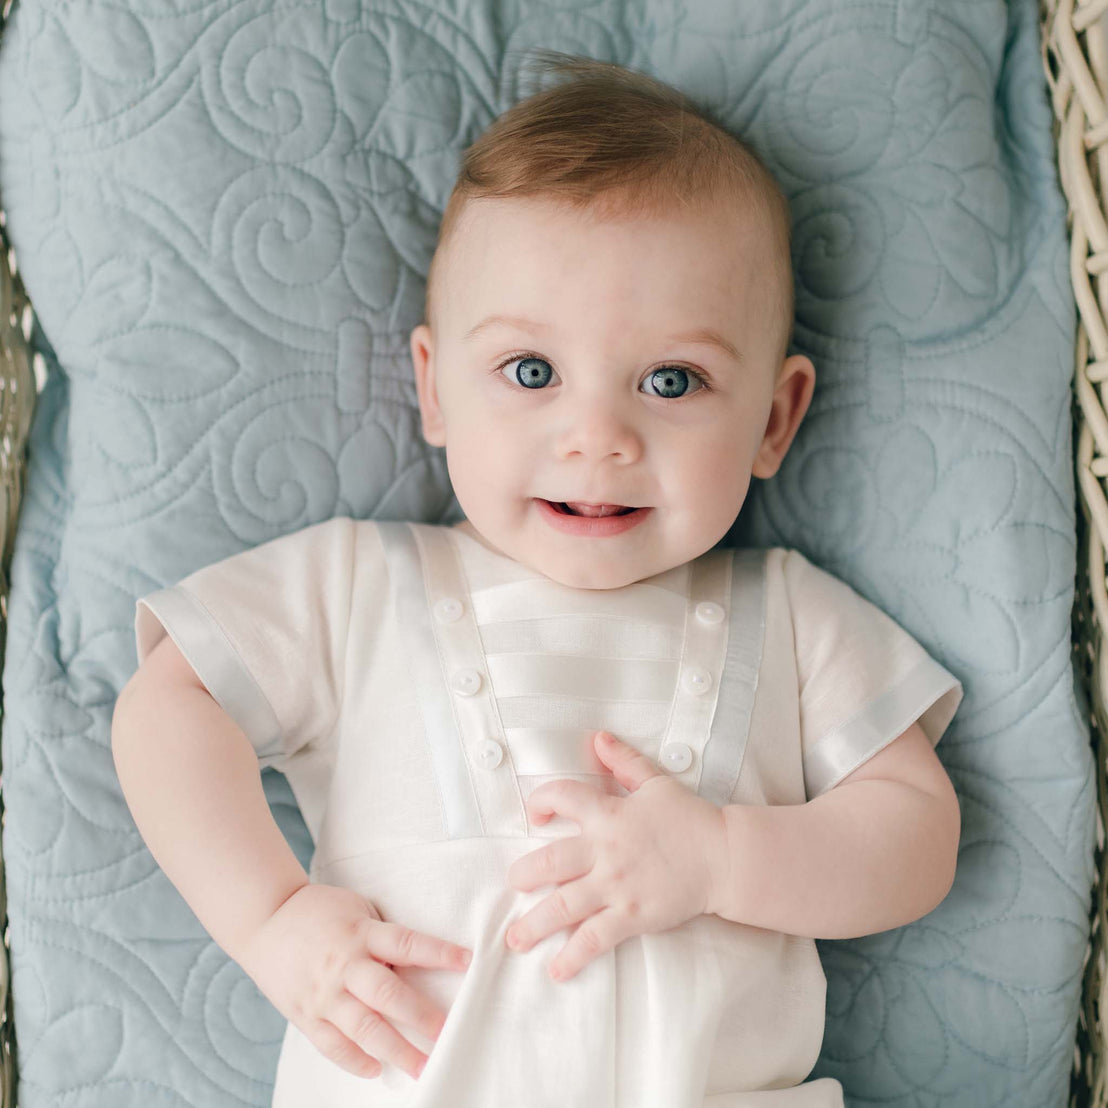 A smiling baby with bright blue eyes lies on a quilted blue blanket, dressed in an Owen Linen Romper, looking directly at the camera.